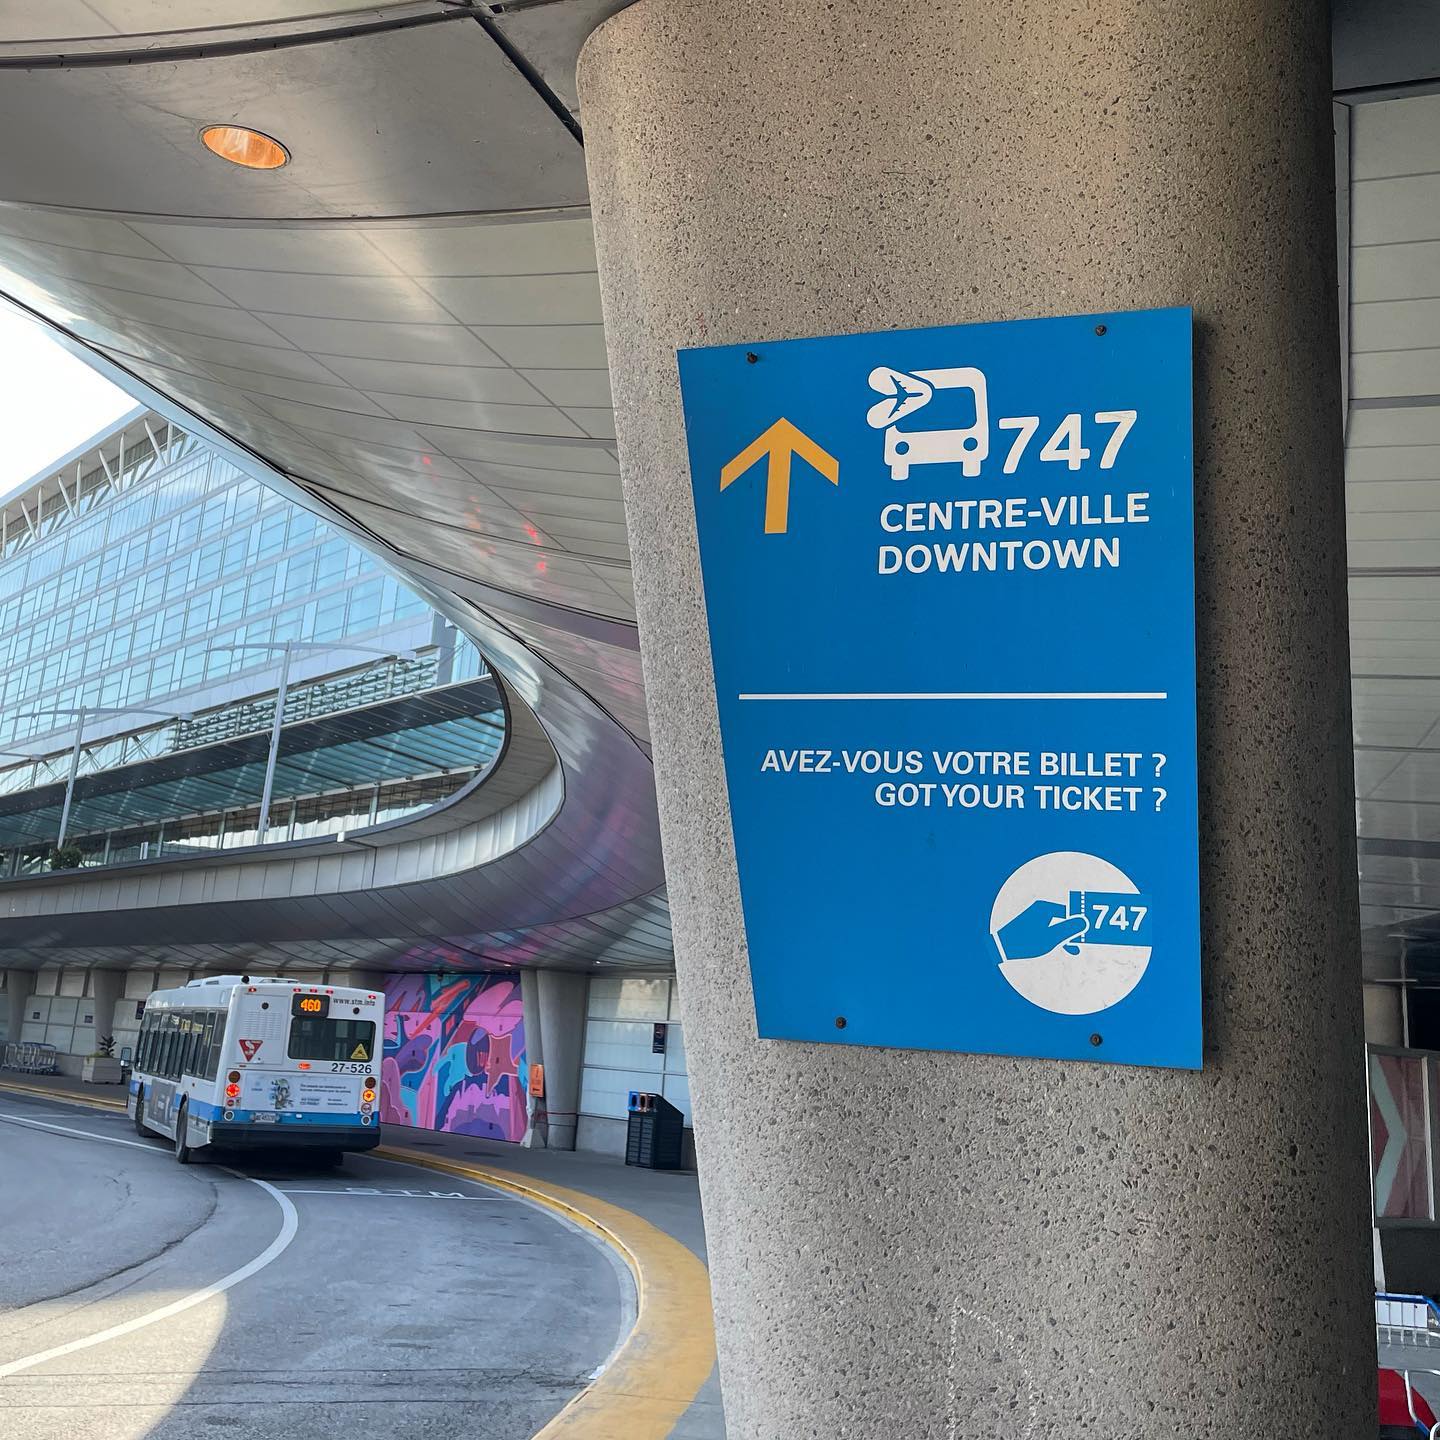 arrivé à Montréal! Can you guess the significance of “747” as the name of the airport bus?

I’m here to teach accessibility, design, and semiotics with @xdmiamioh this weekend! @miamiuniversity @miamiohcca